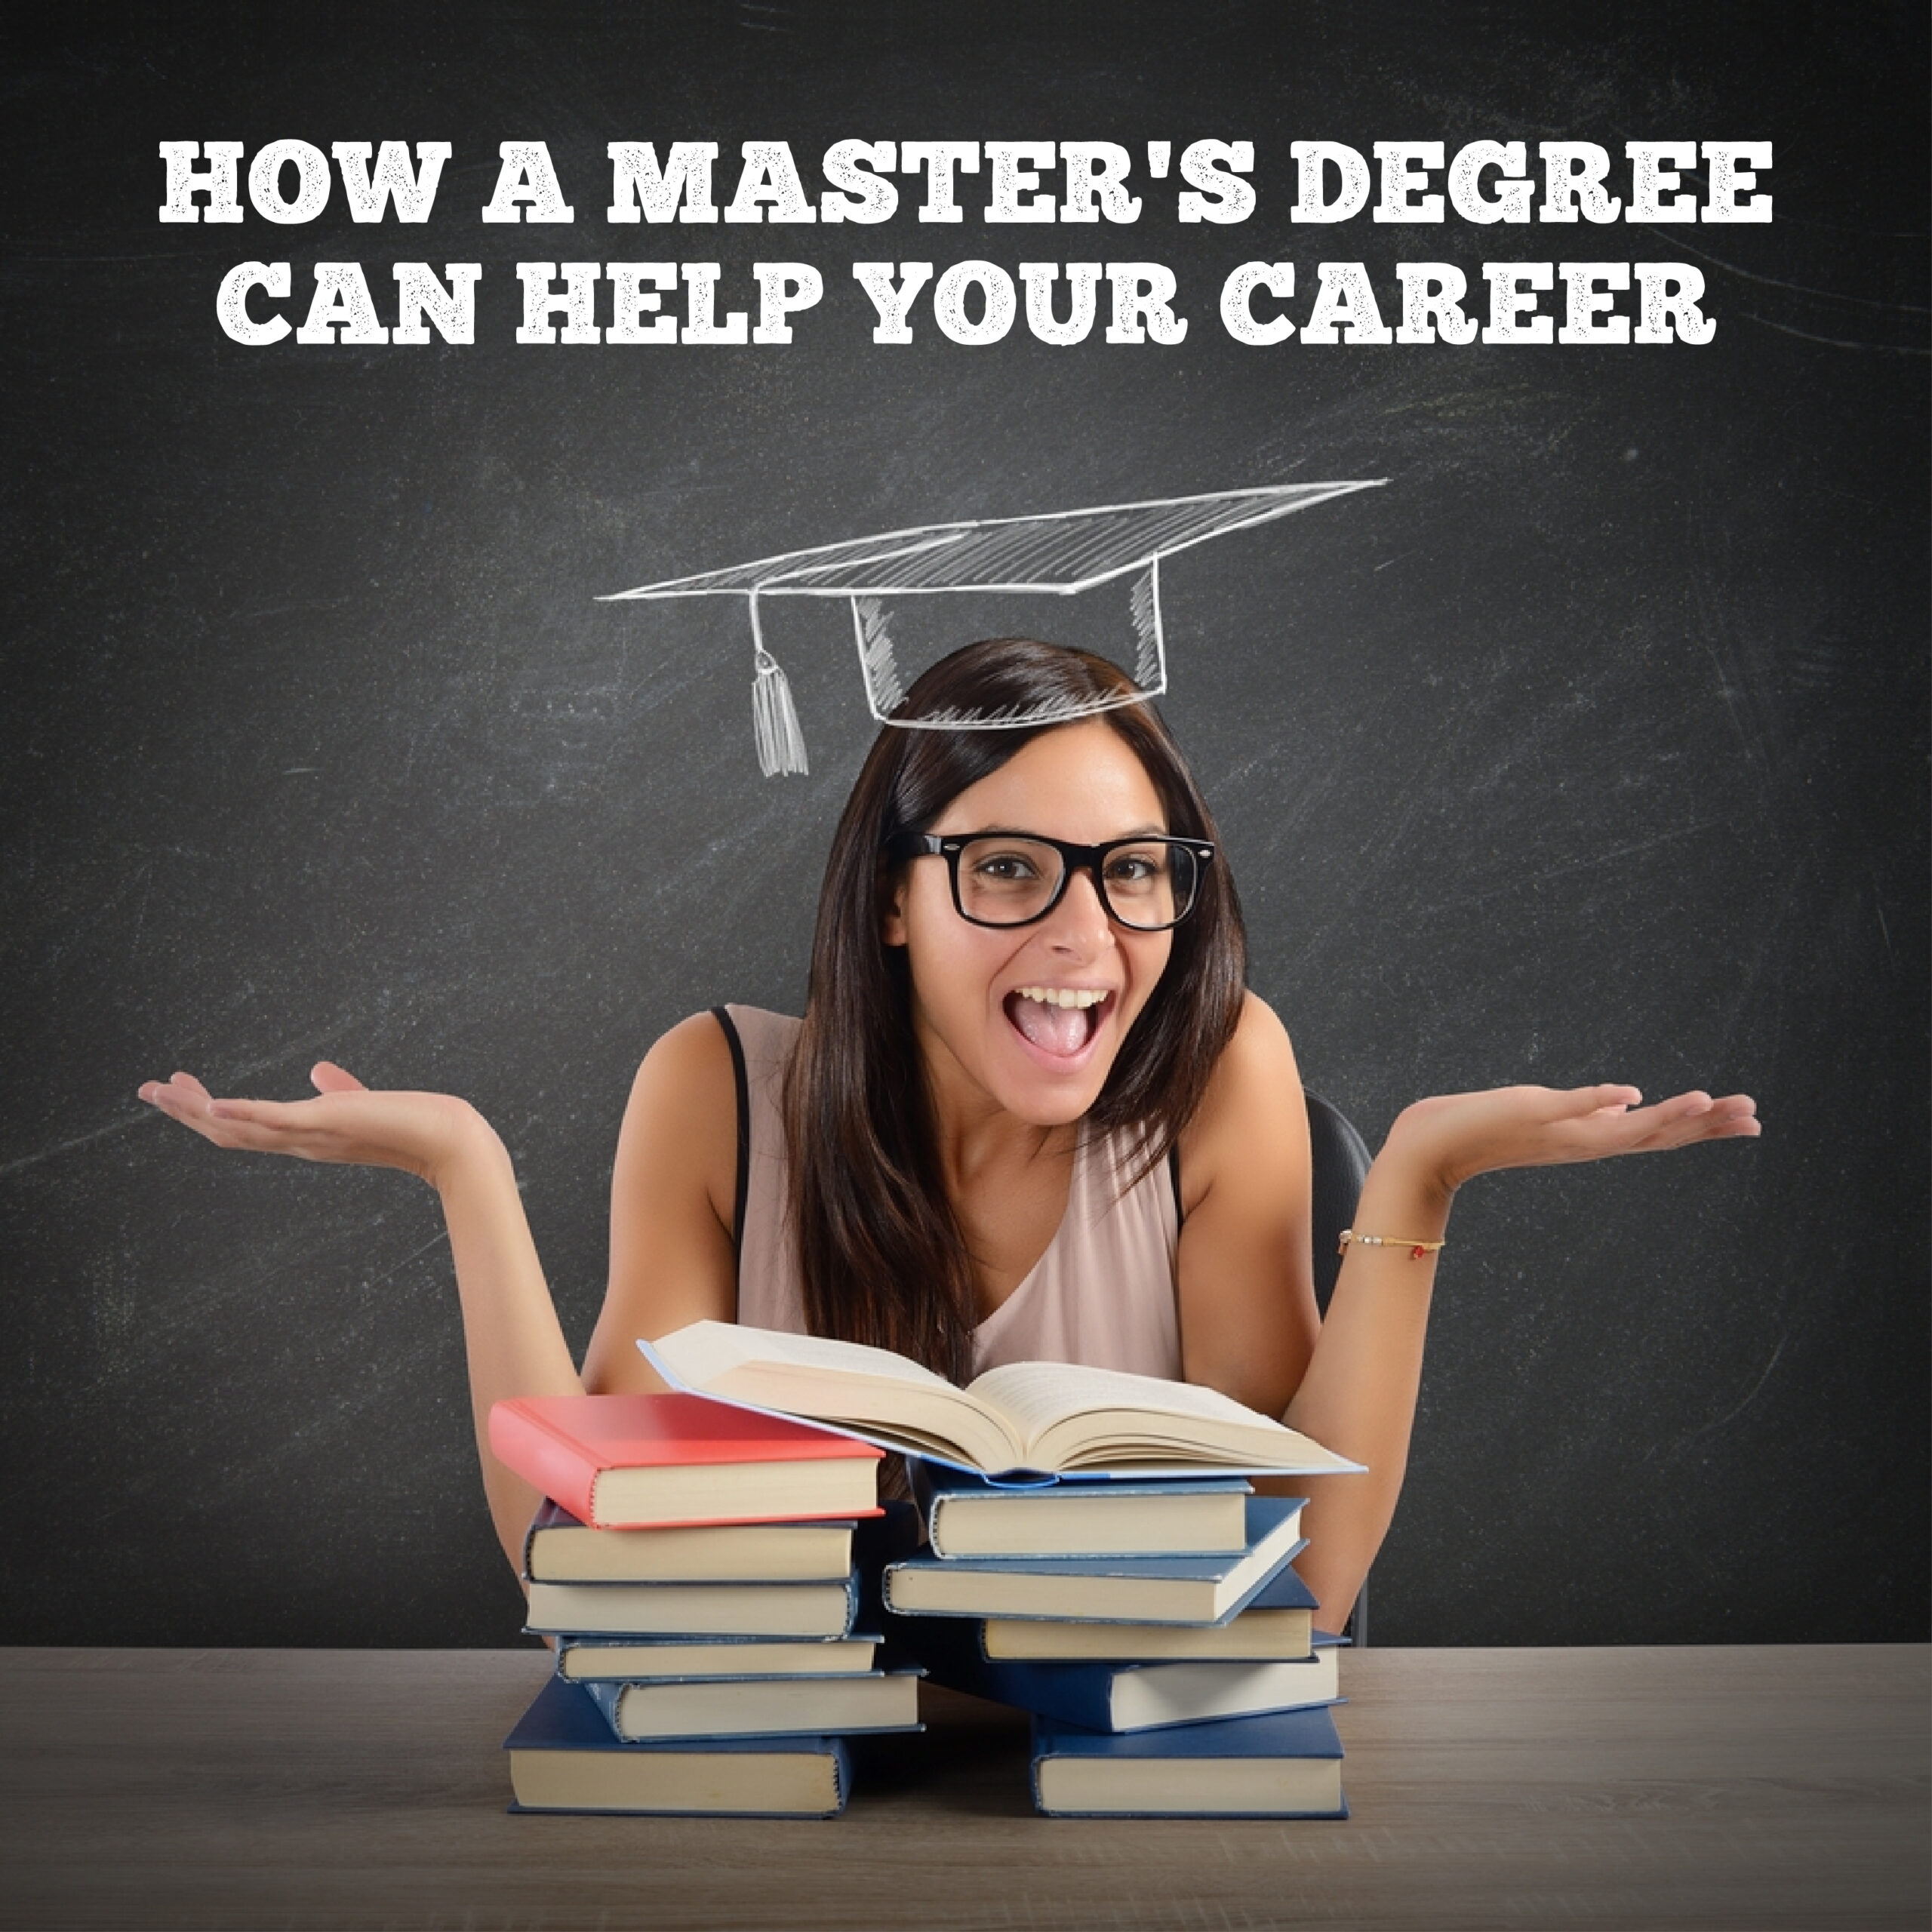 How a Master’s Degree Can Help Your Career